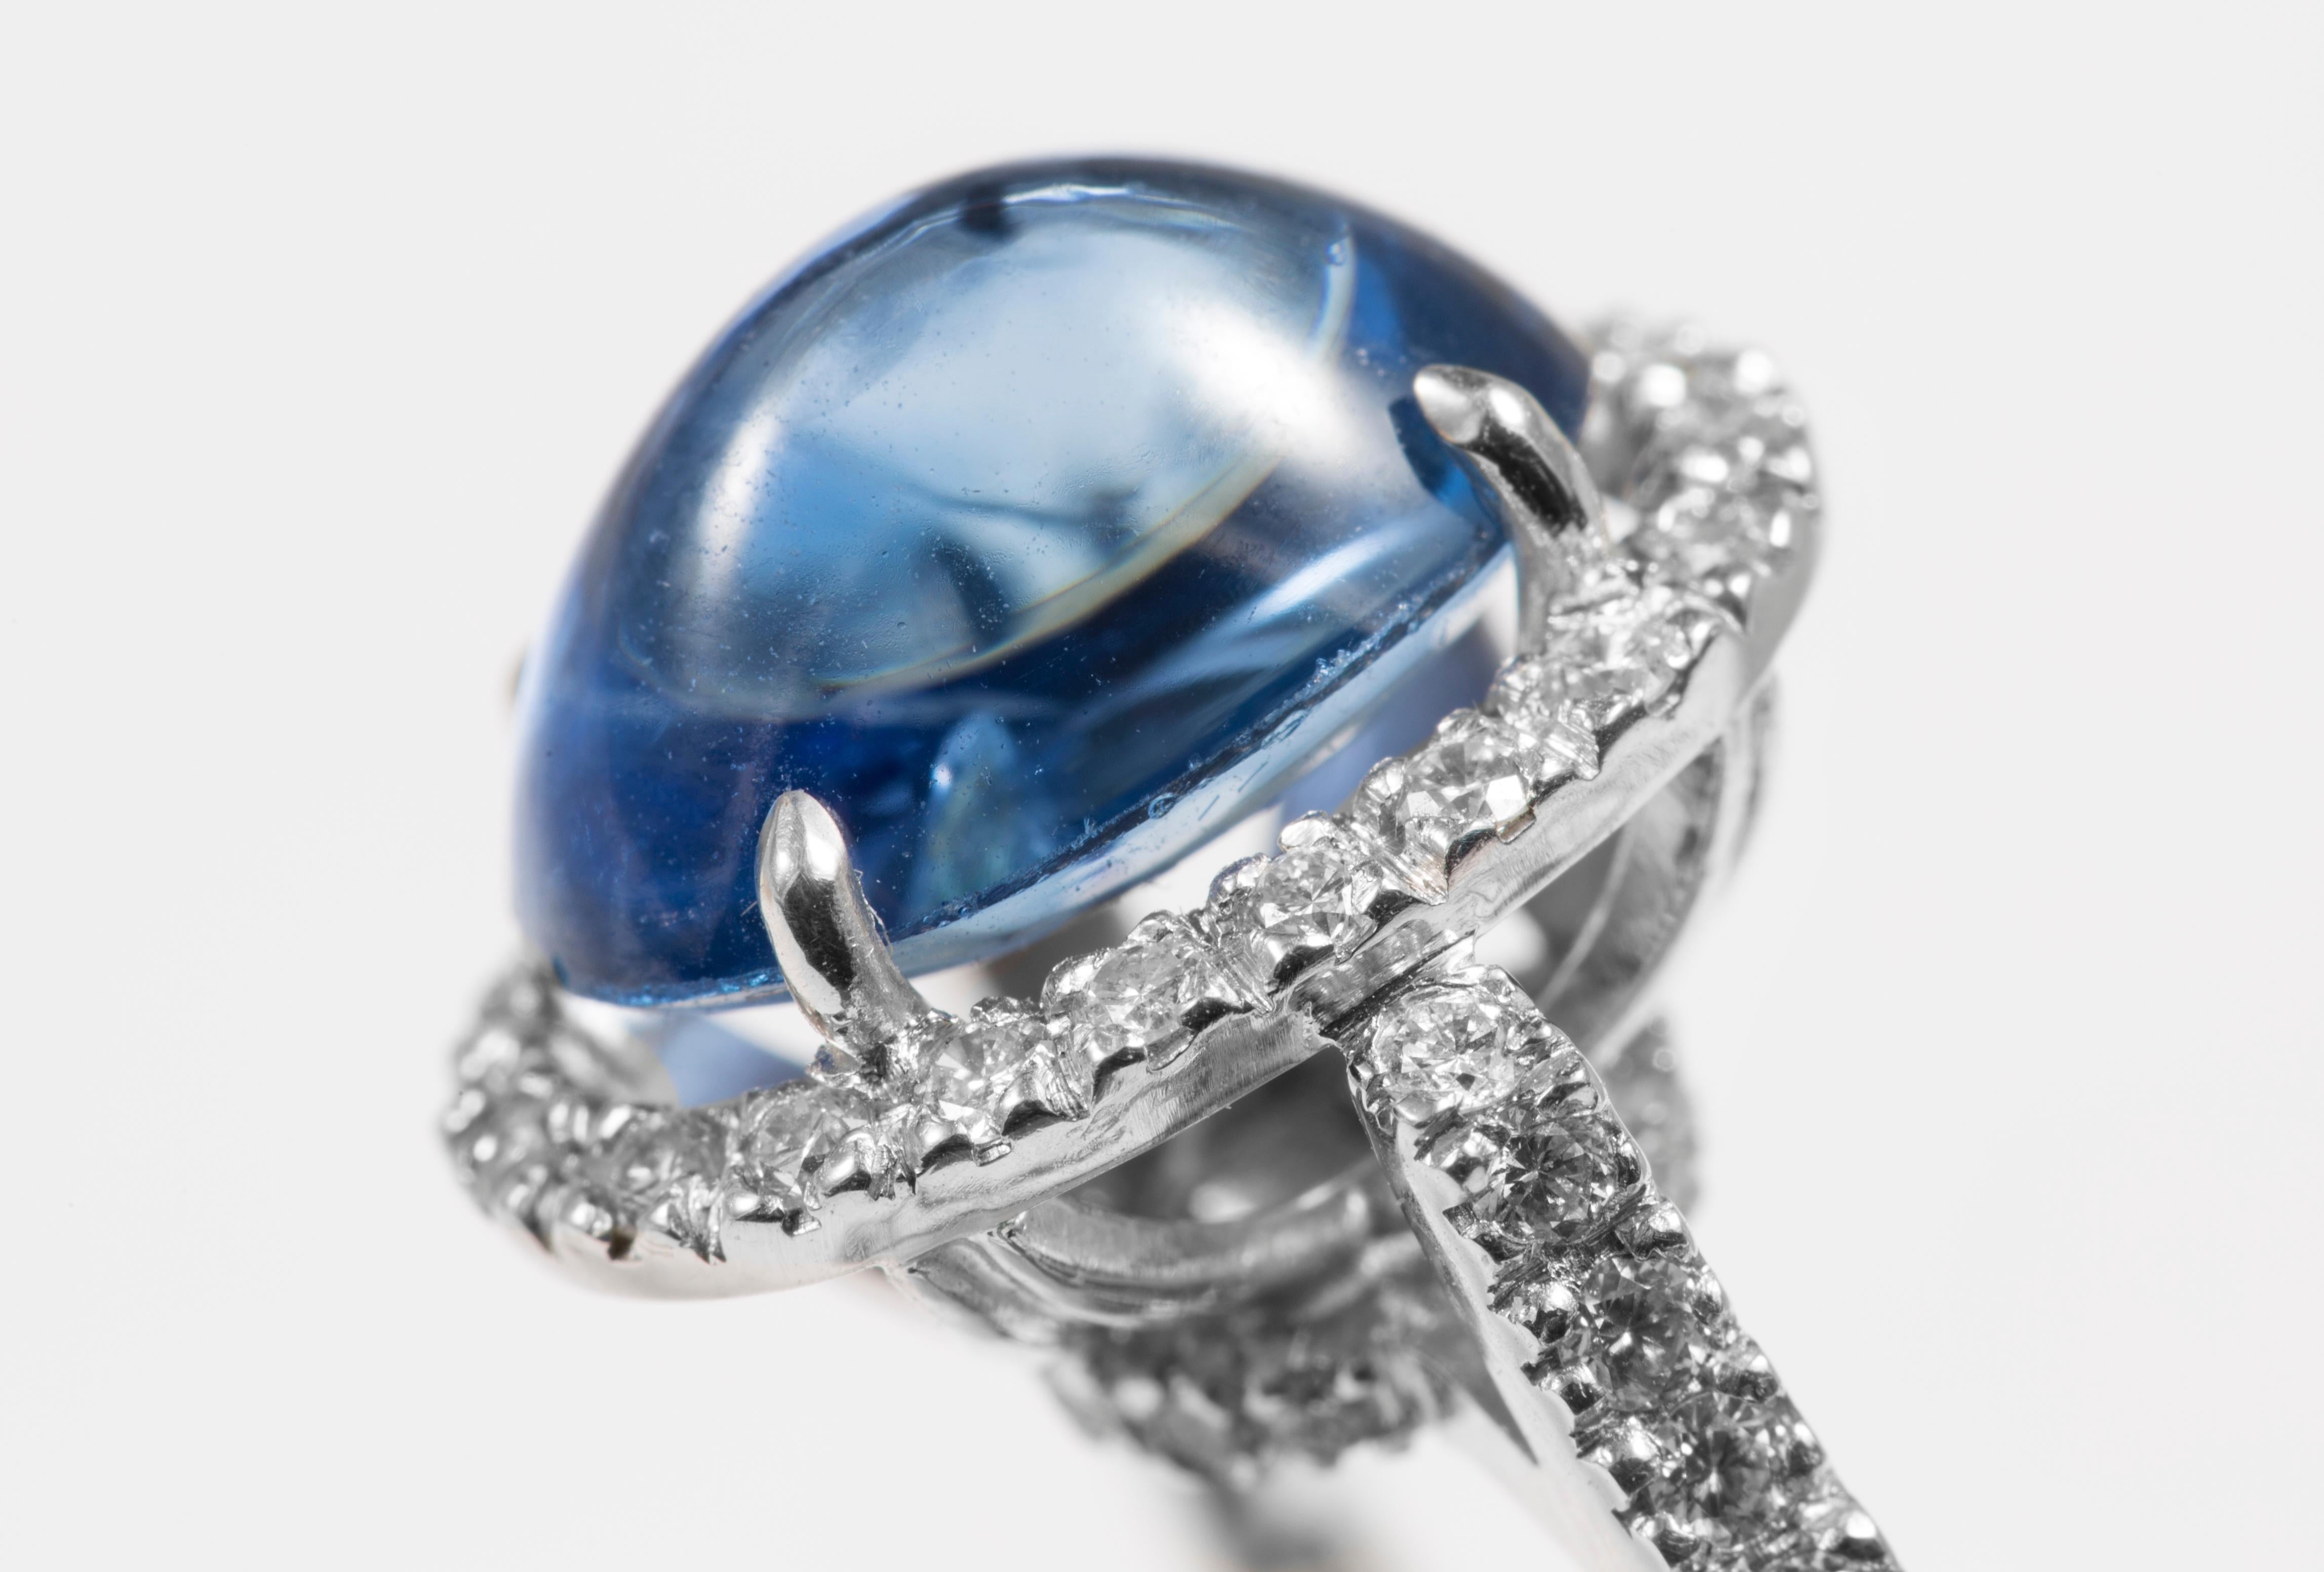 Burmese Blue sapphire Ring with Diamonds in 18K white gold

Ring size: 6.5 ( can be sized )

18K Gold: 6.20gms
Blue Sapphire: 5.10cts
Diamond: .45cts
